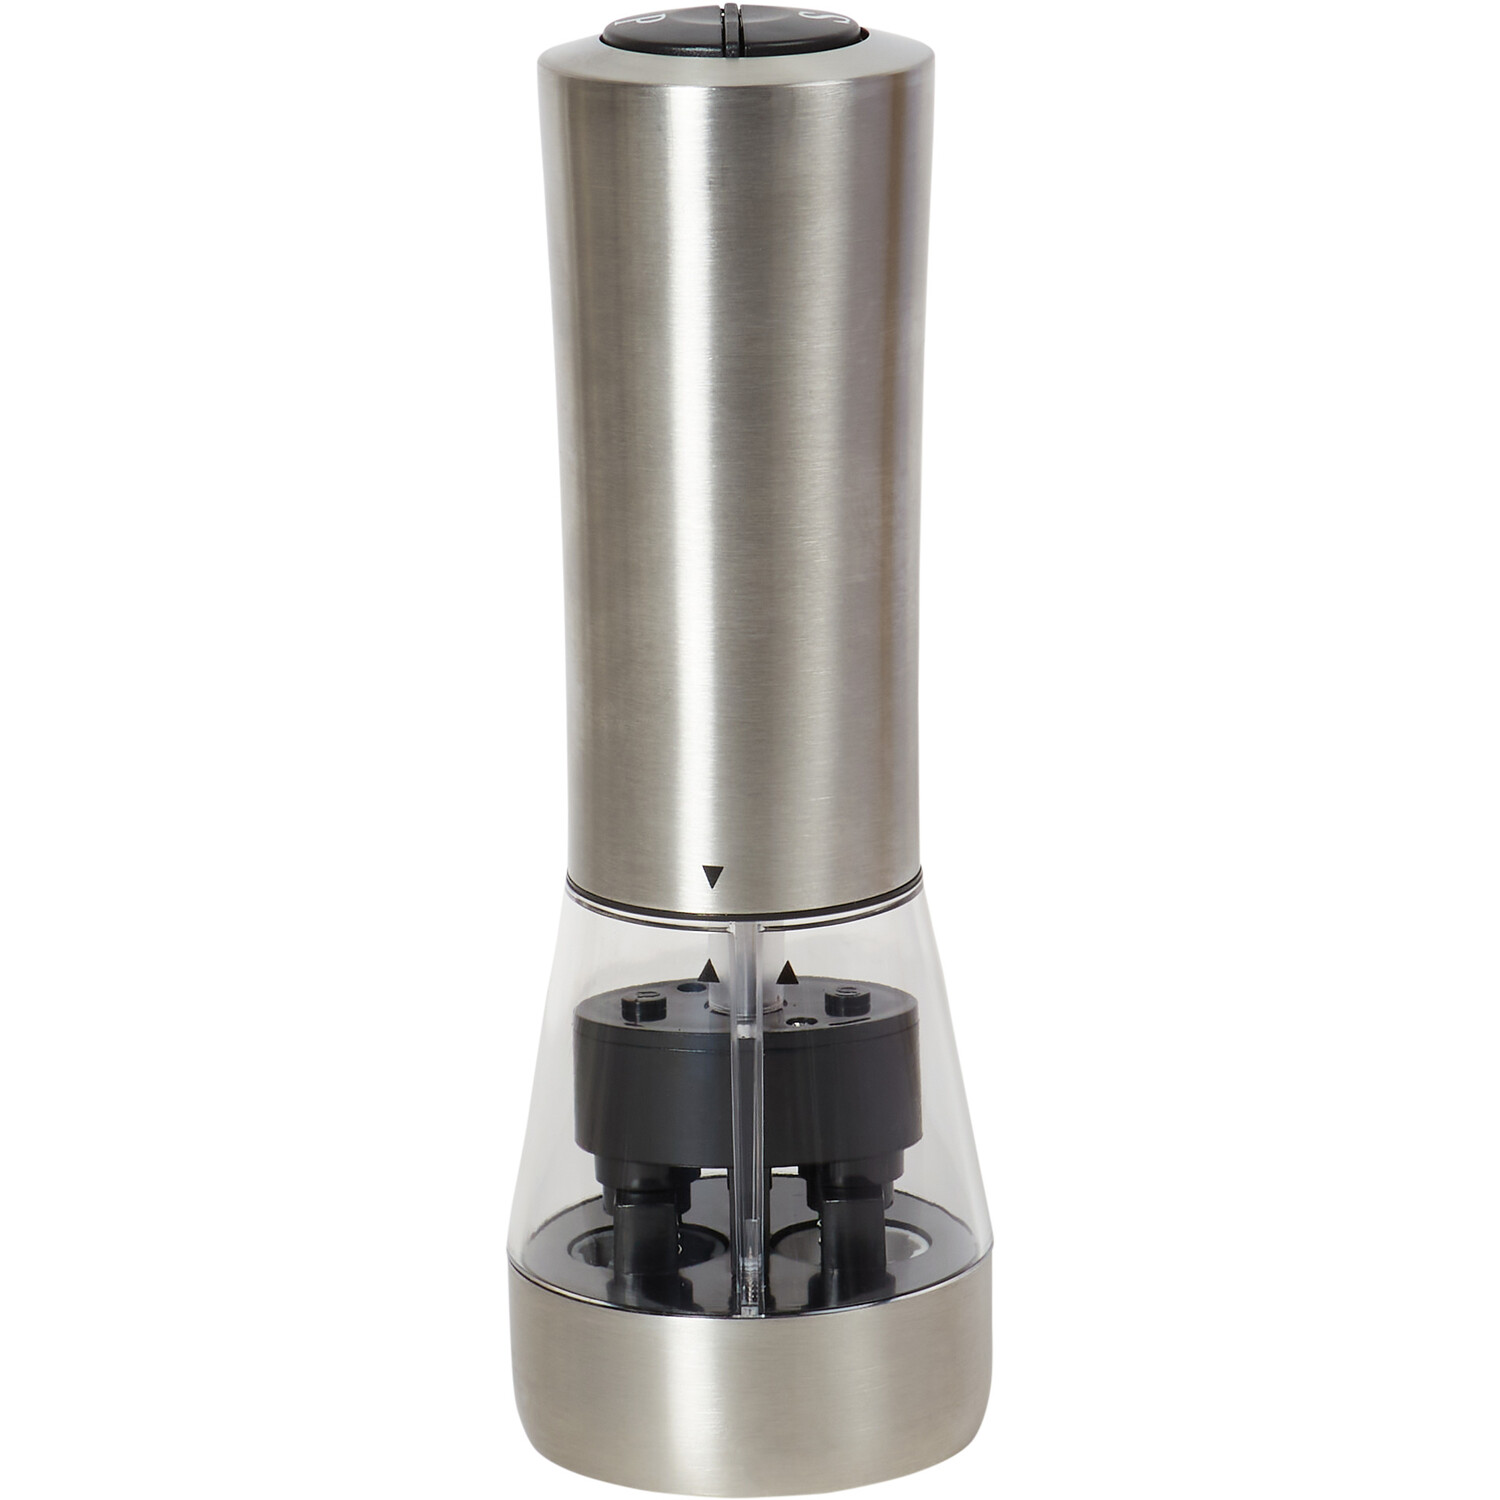 Electric 2-in-1 Salt and Pepper Mill - Silver Image 1